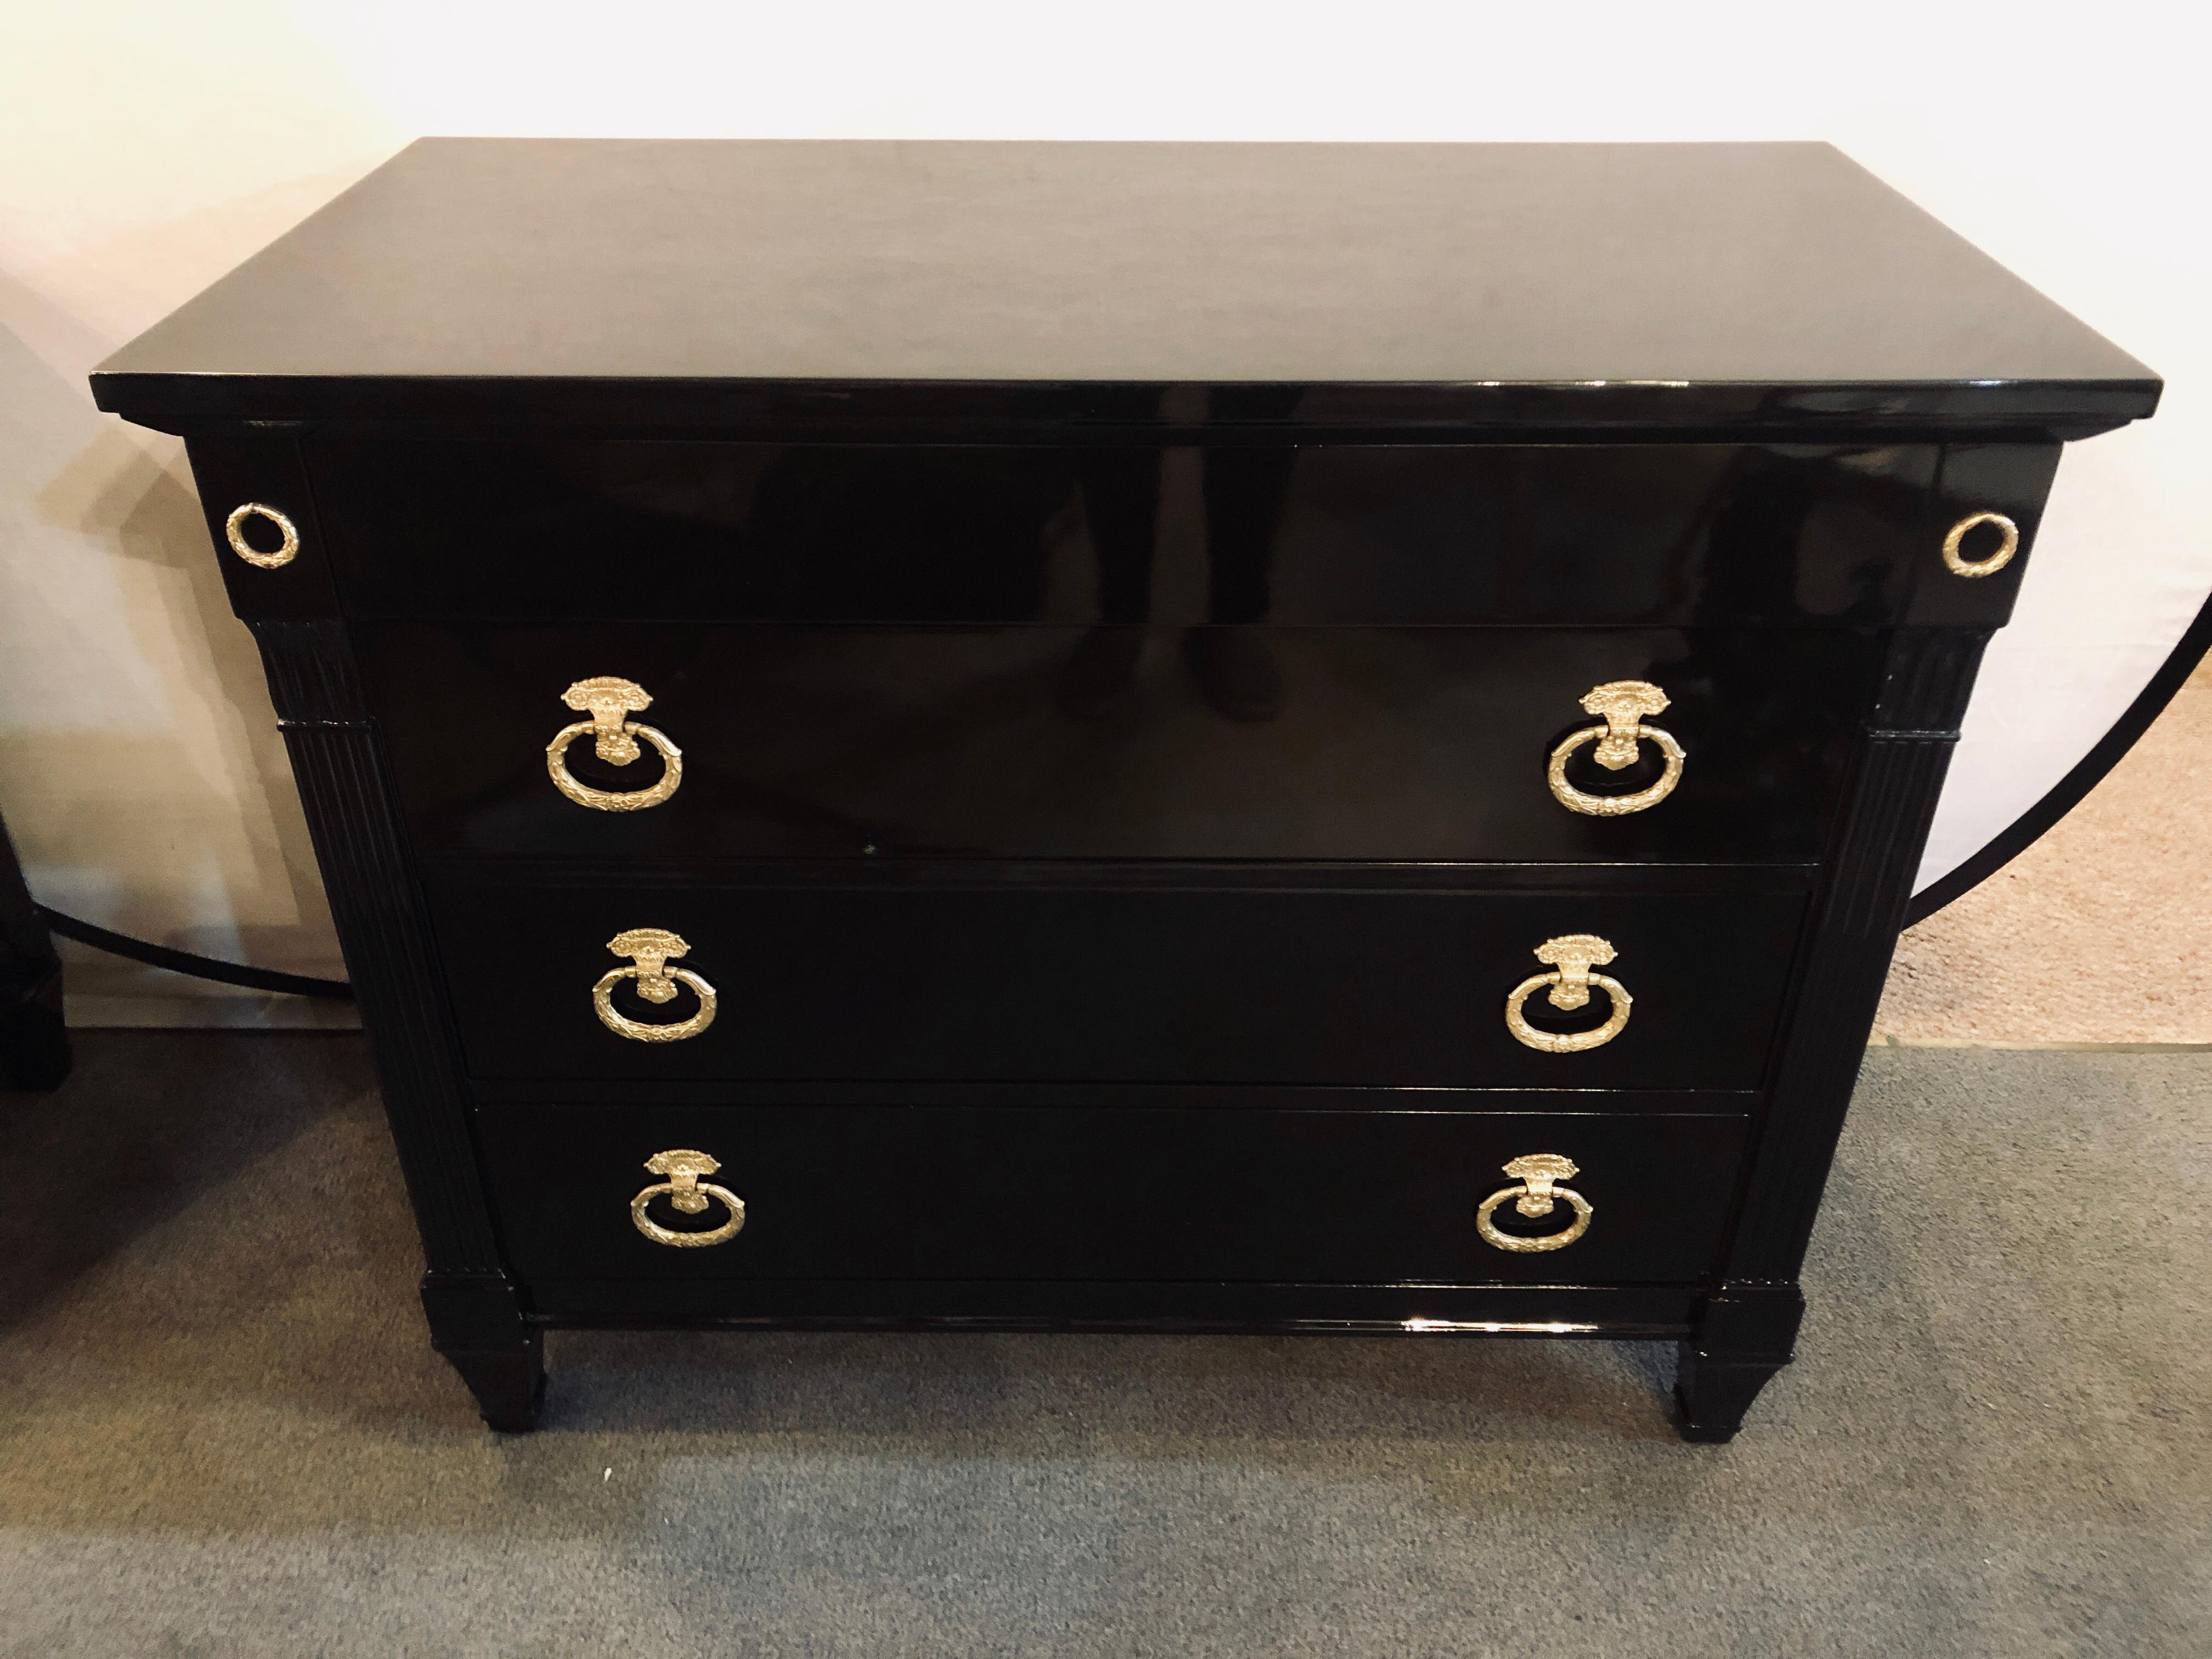 Bronze Pair of Jansen Style Hollywood Regency Ebony Commodes, Chests or Nightstands